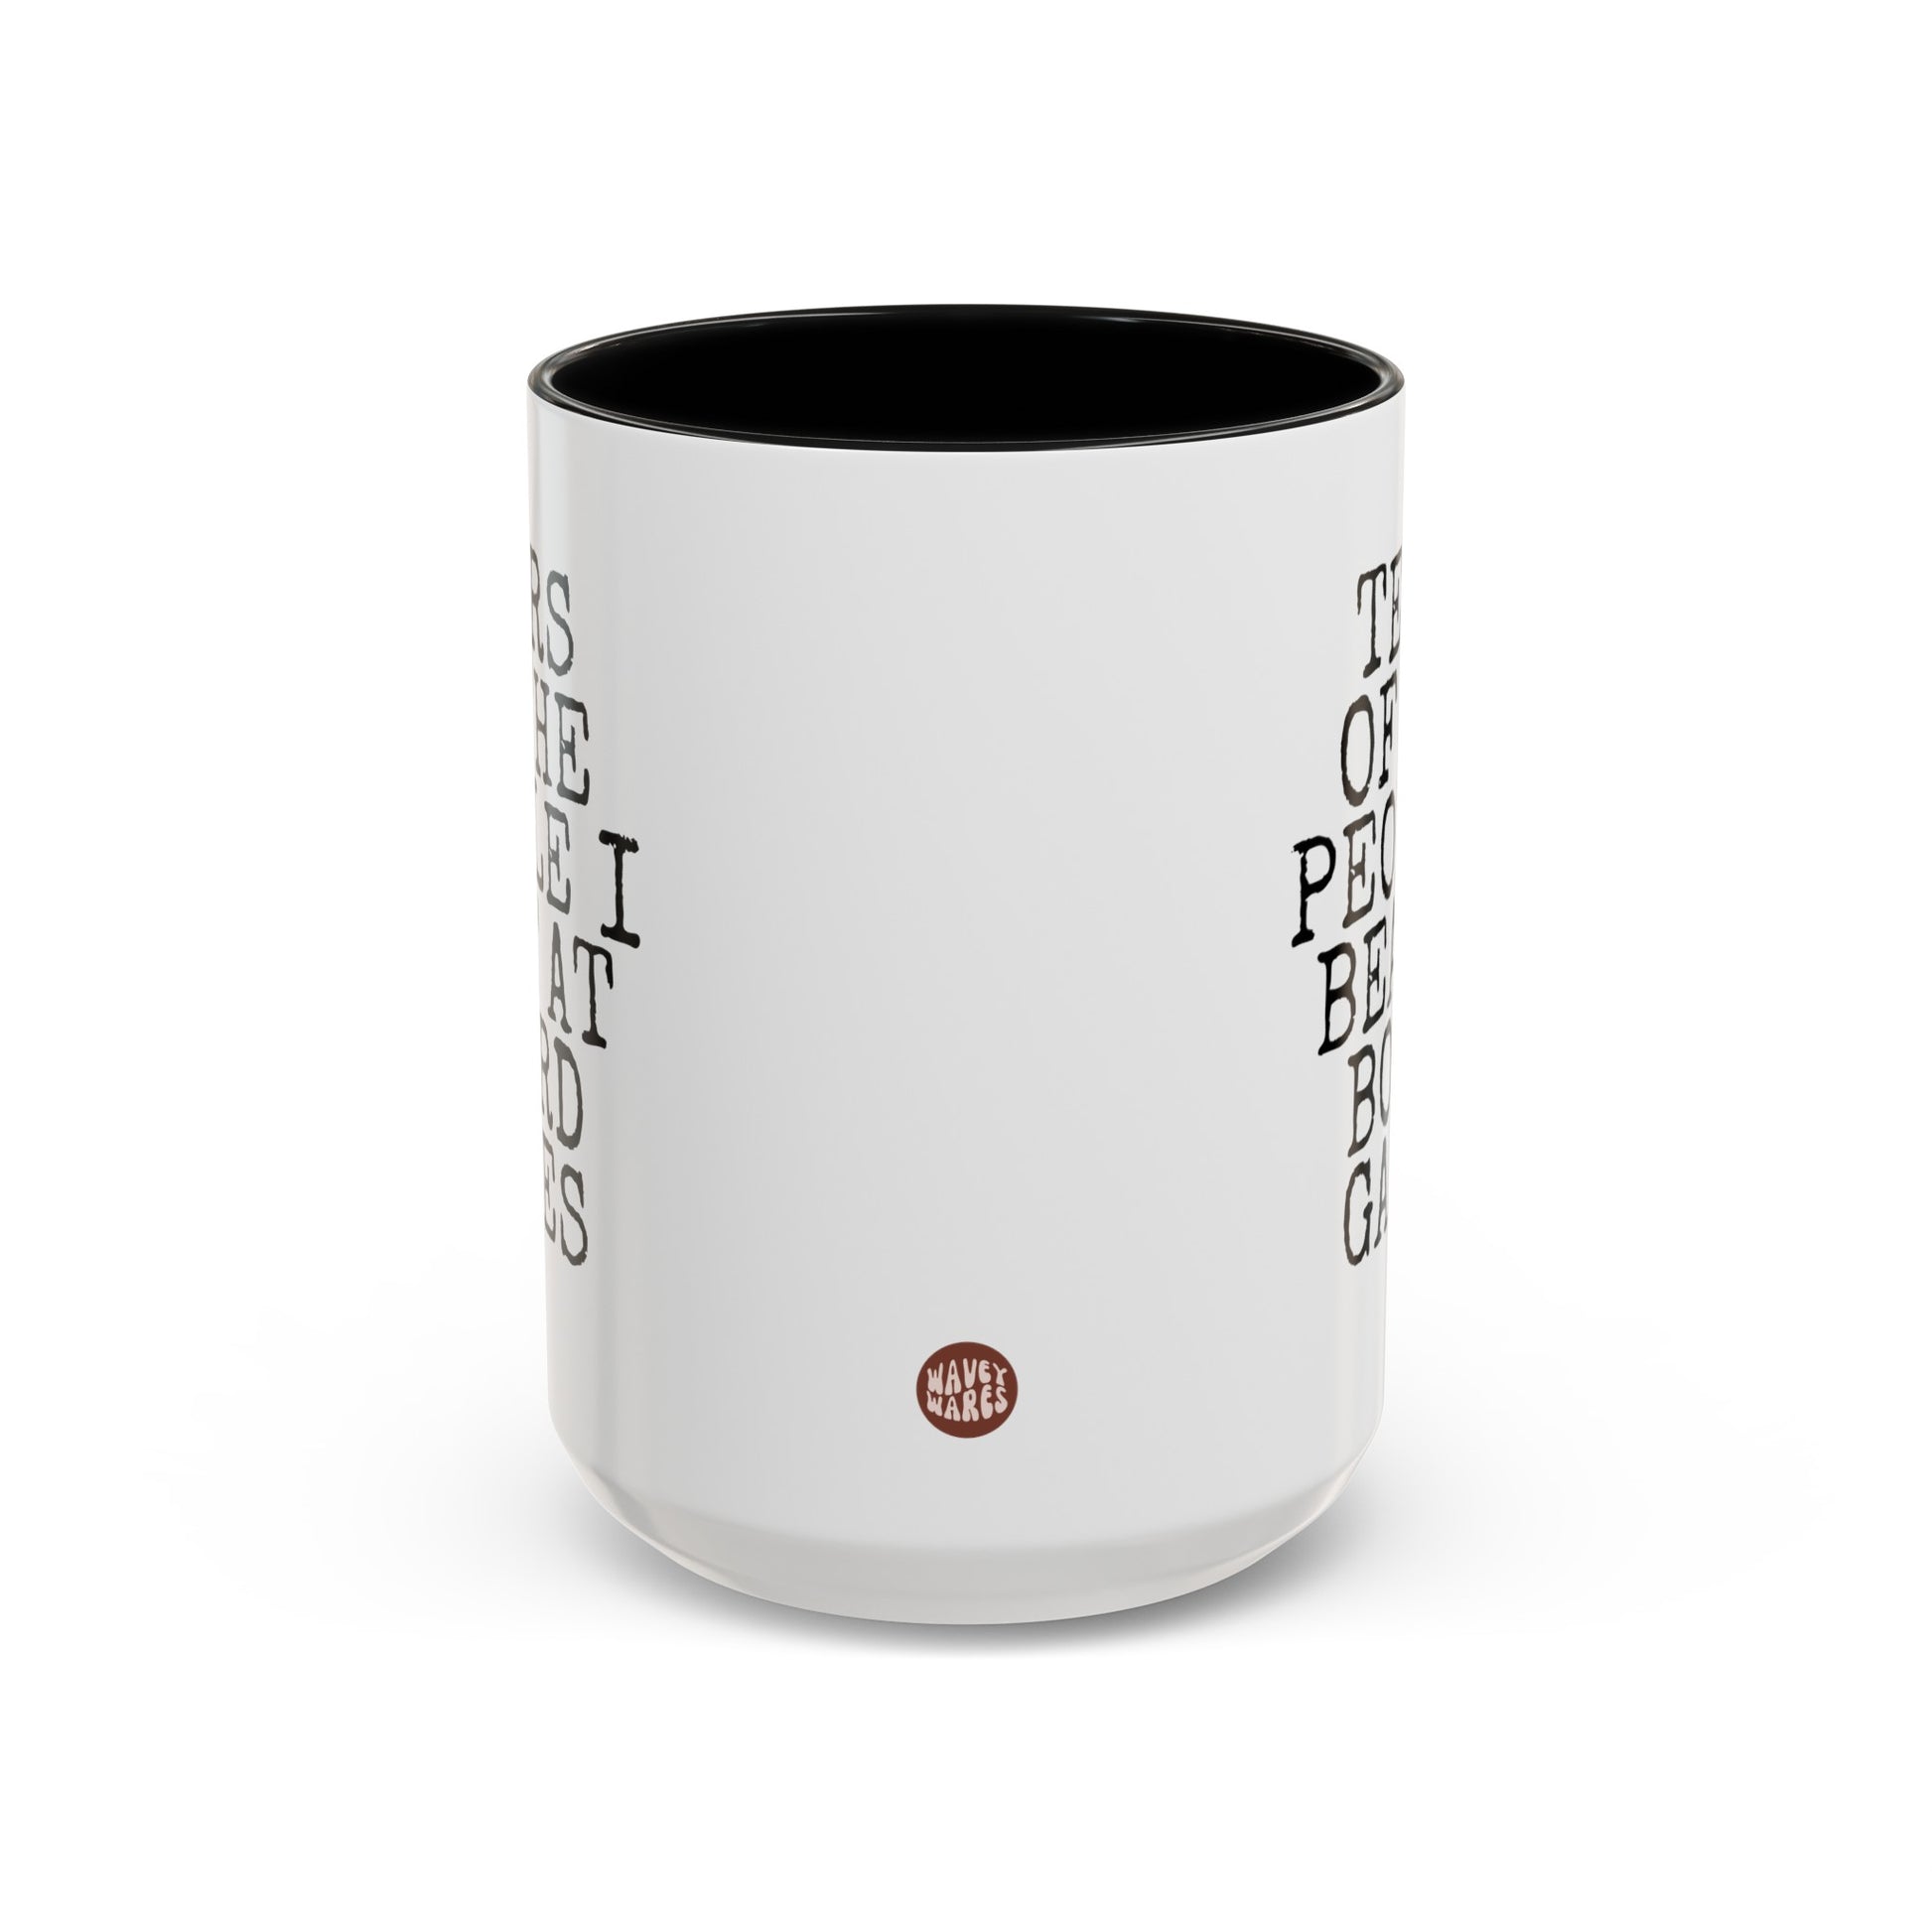 Tears Of The People I Beat At Board Games 15oz white with black accent funny large coffee mug gift for friends player him her quote waveywares wavey wares wavywares wavy wares side